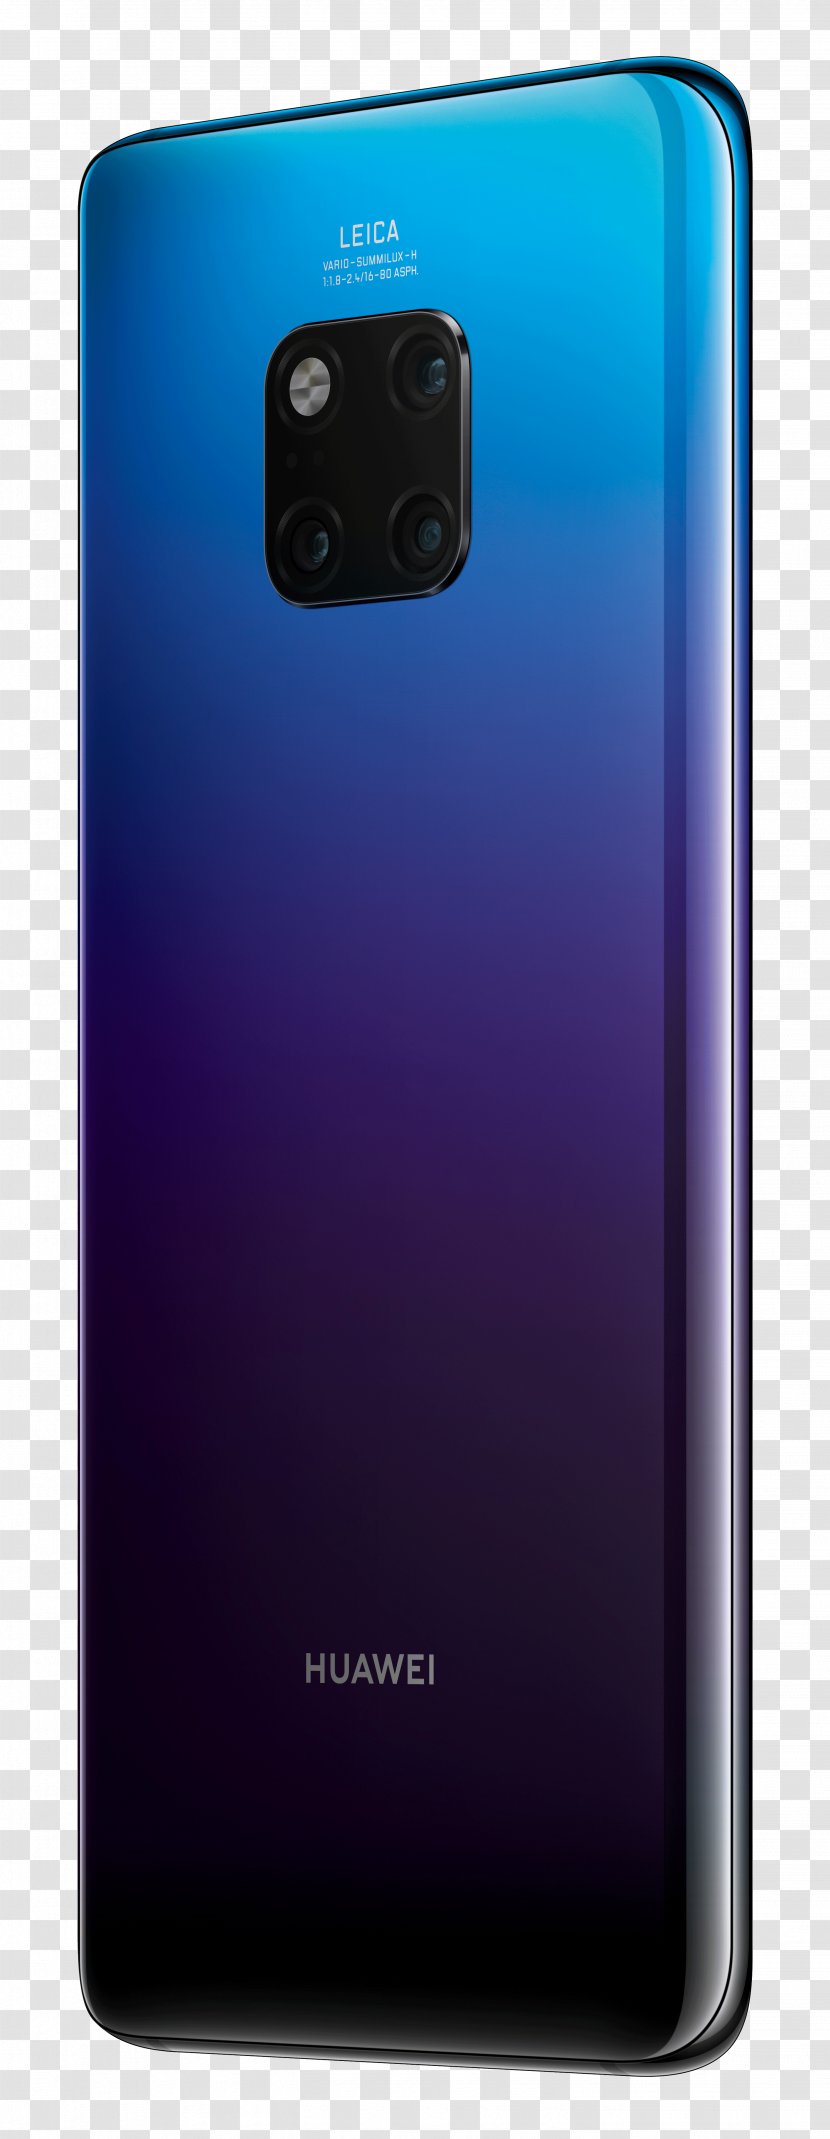 Feature Phone Huawei Mate 20 Pro Smartphone - Gadget - Powerful Frame Transparent PNG